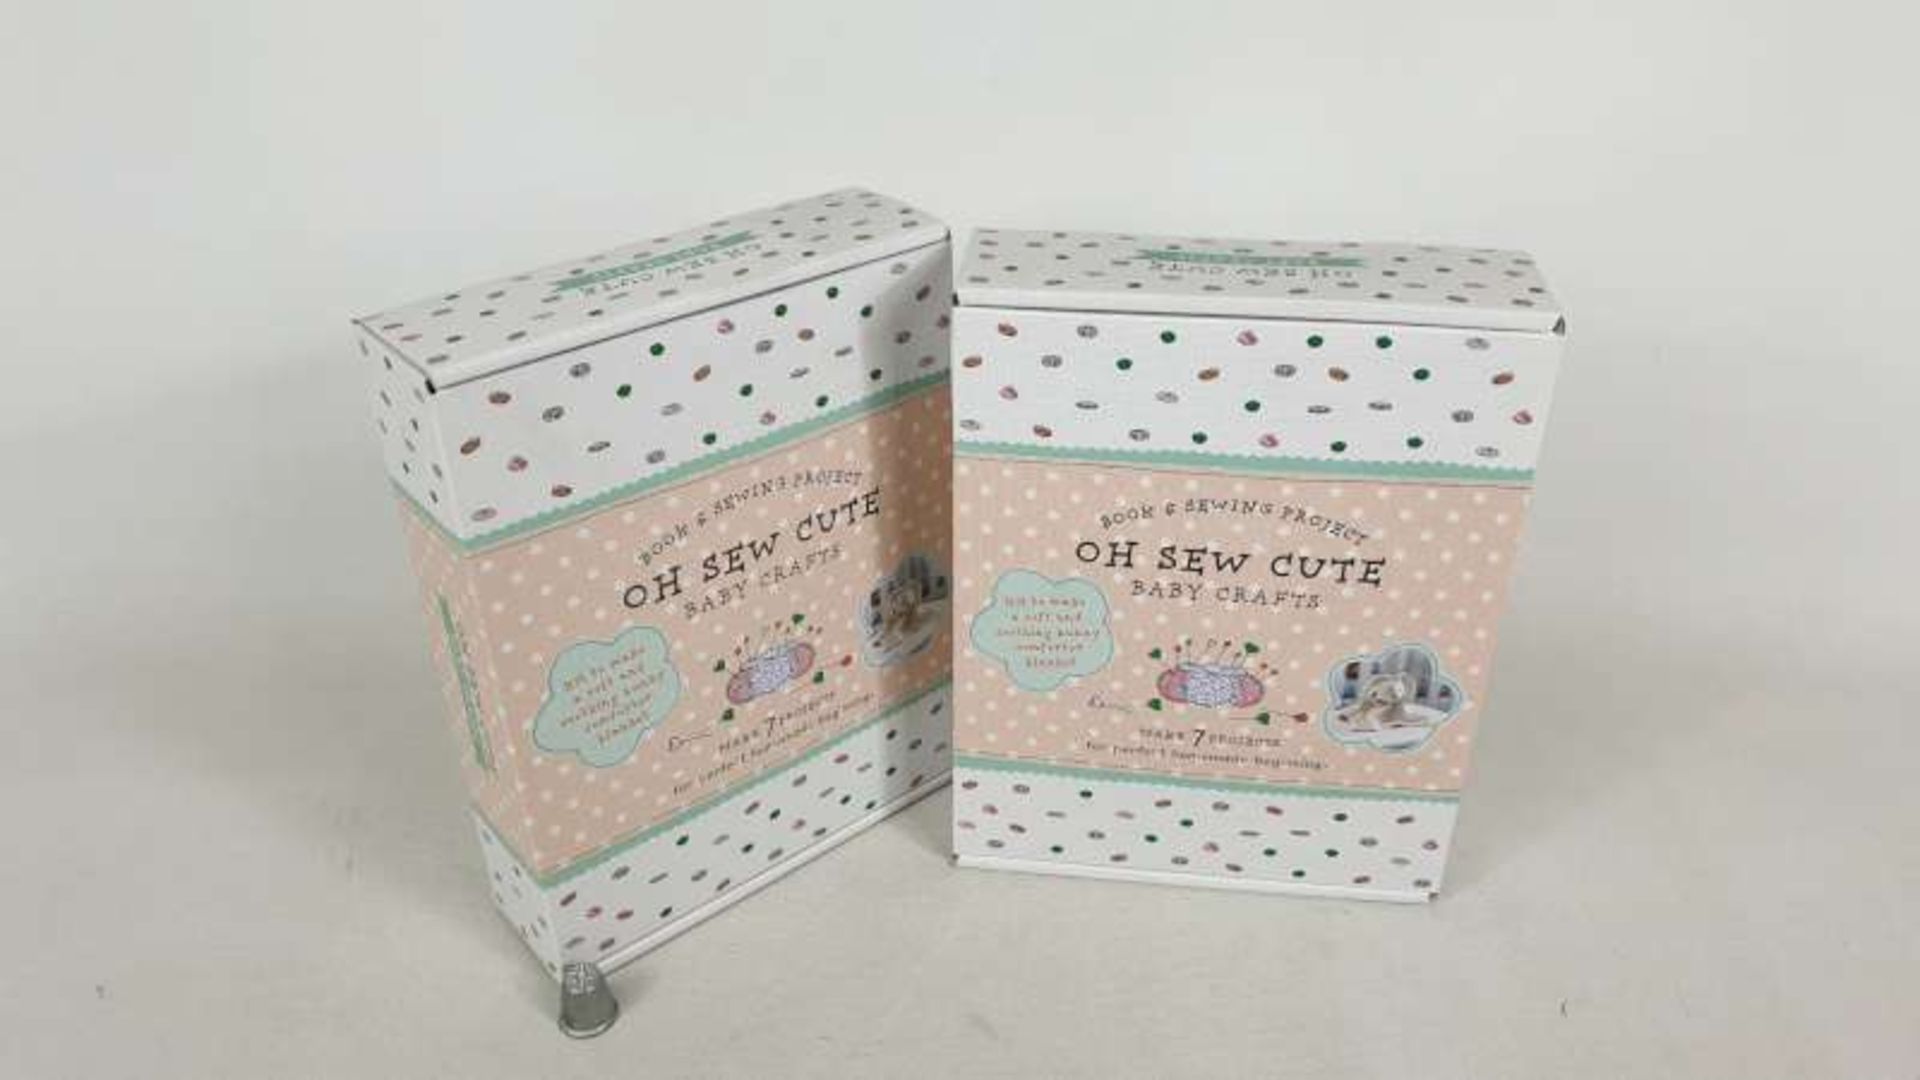 60 X BOOK AND SEWING PROJECT OH SEW CUTE BABY CRAFTS IN 5 BOXES